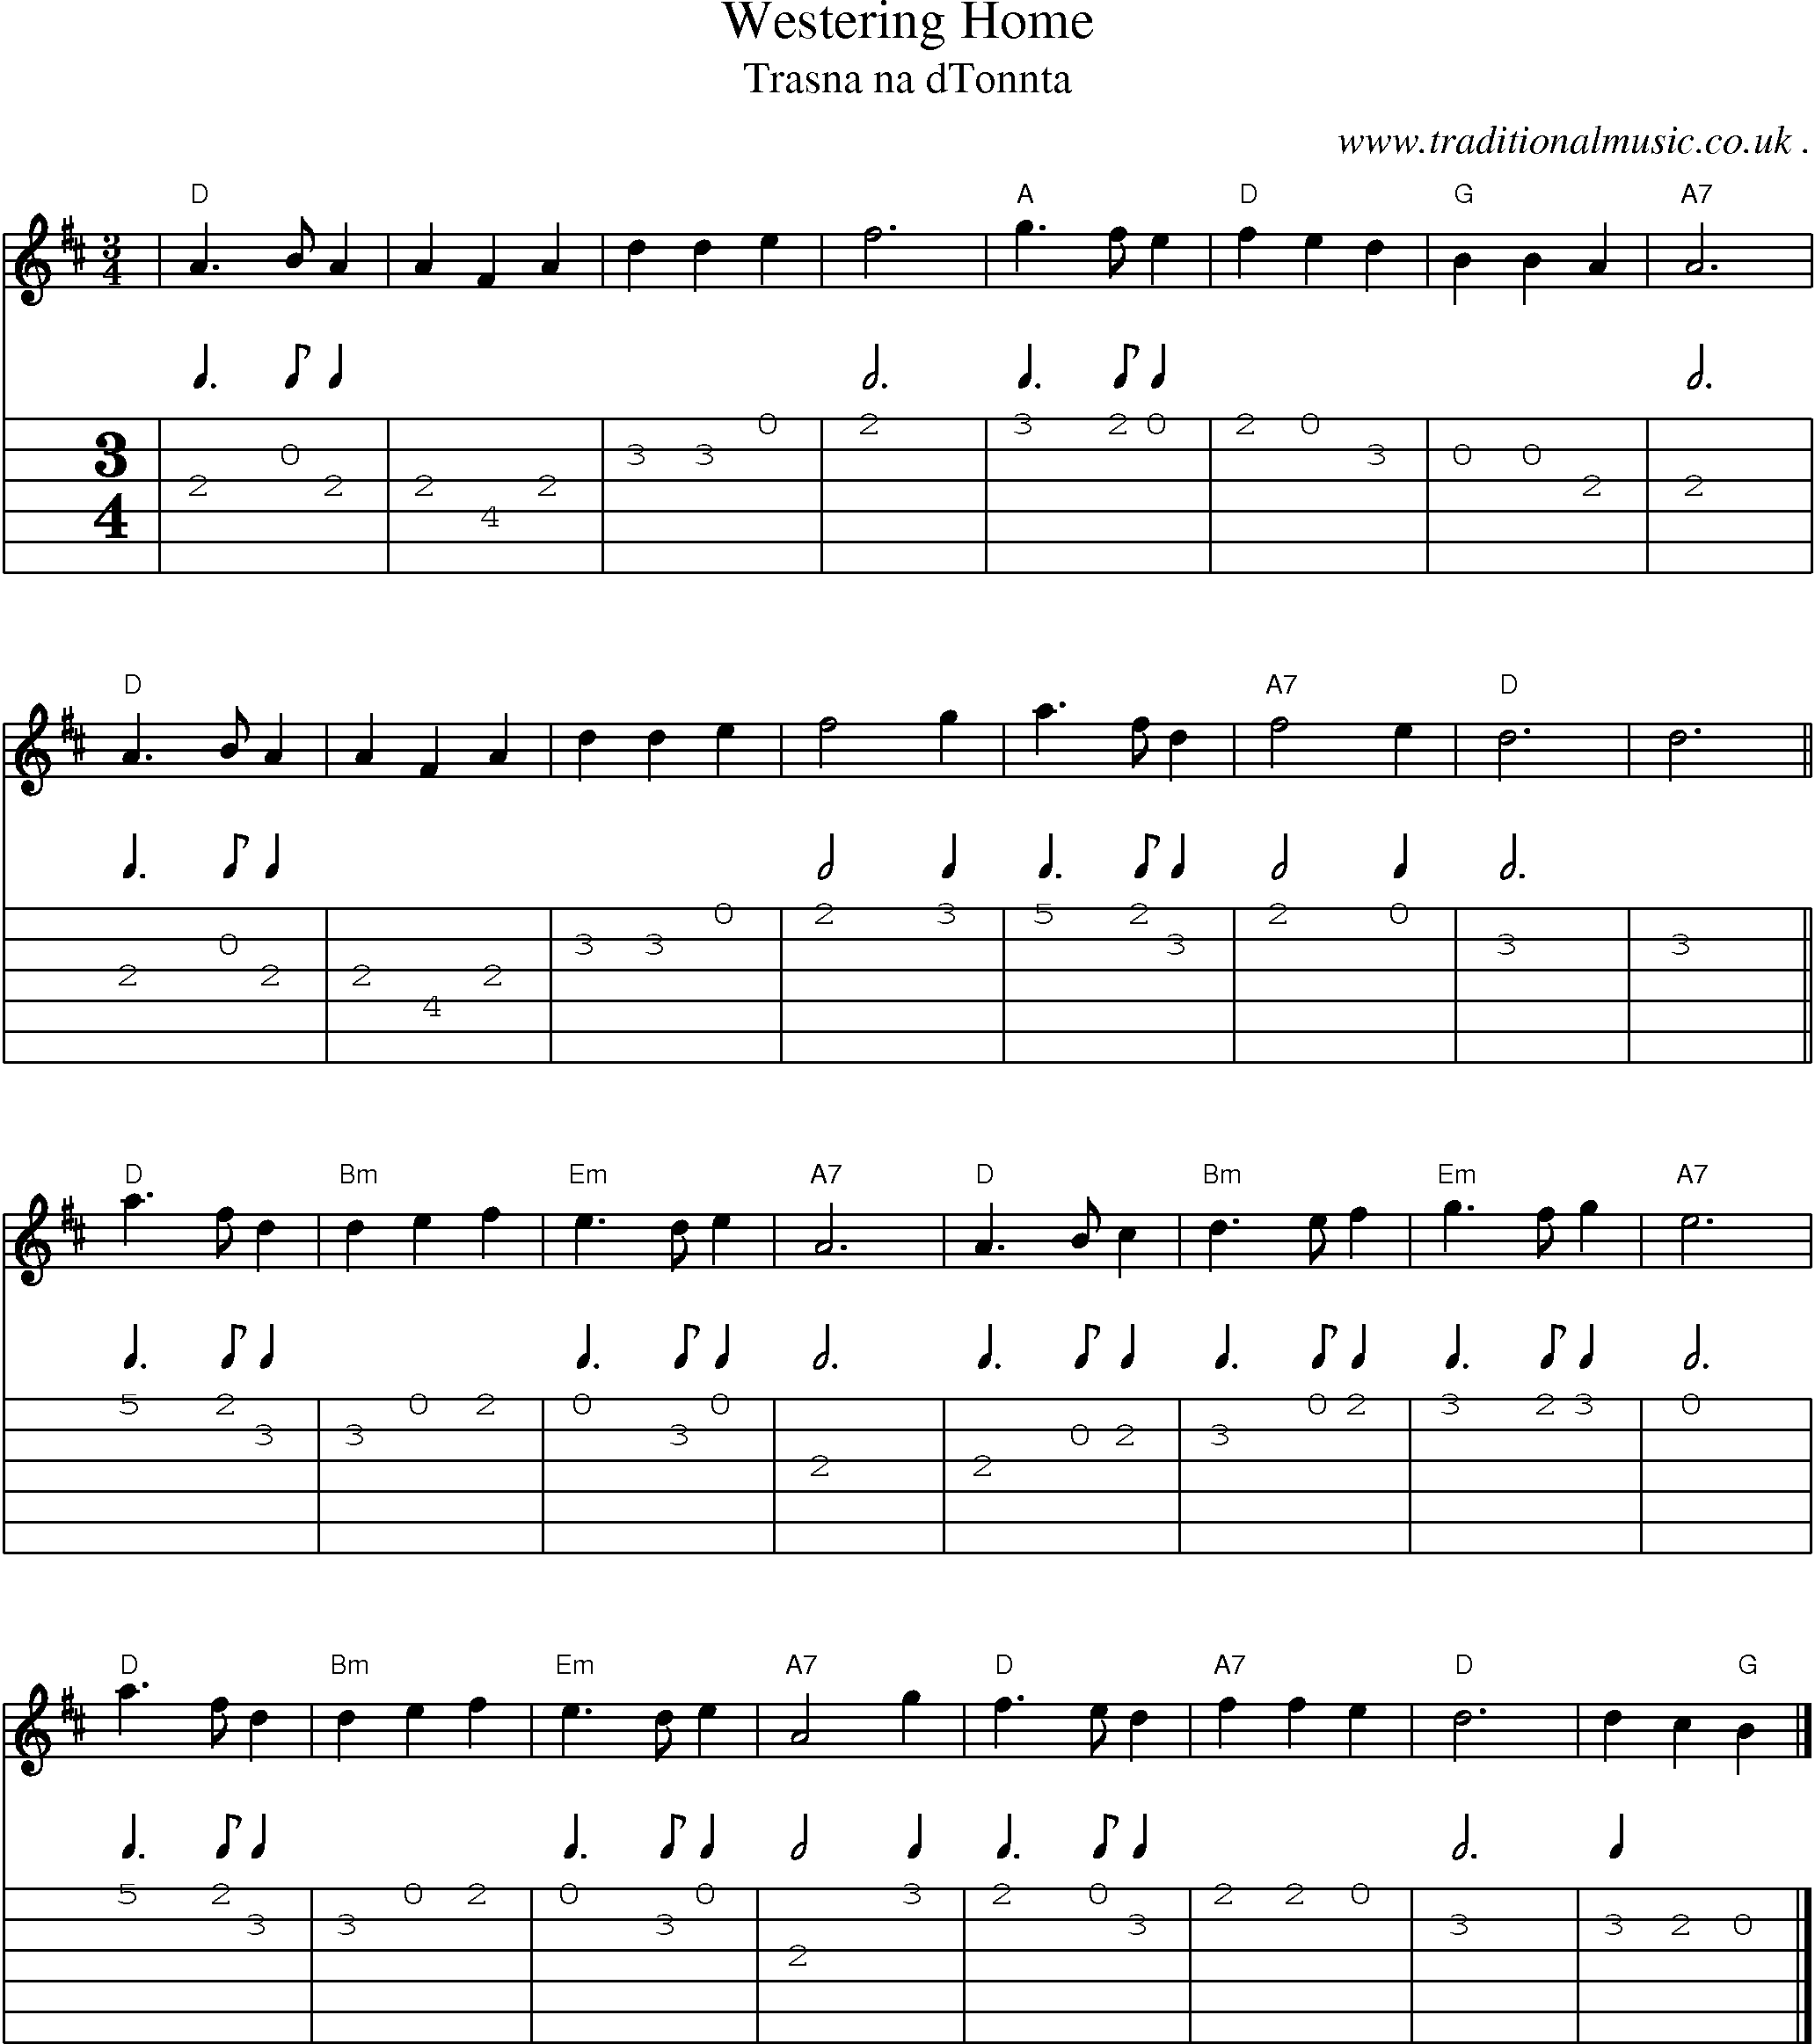 Music Score and Guitar Tabs for Westering Home